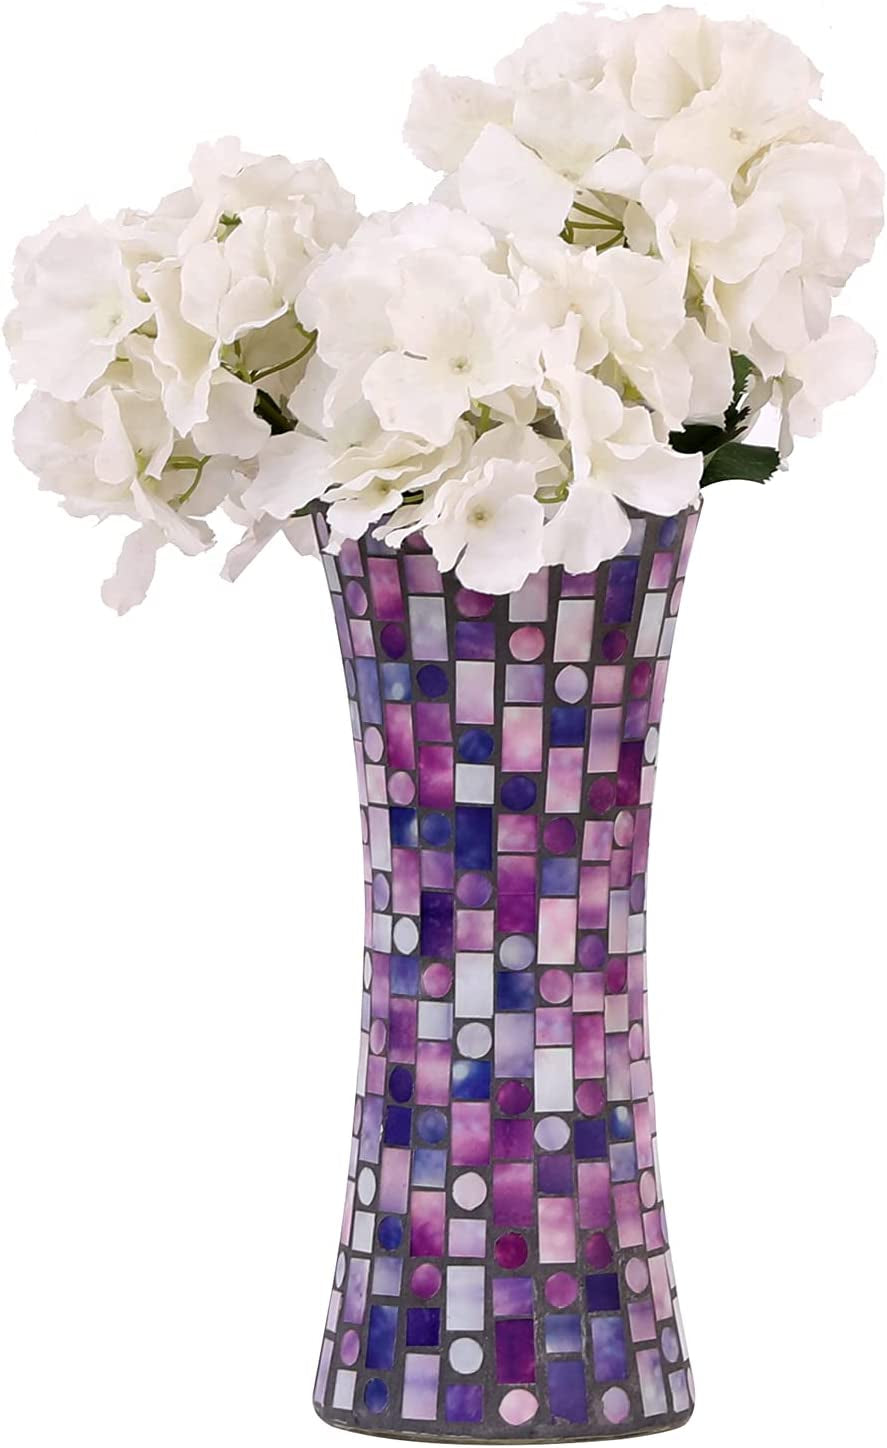 Large Glass Vase for Flower, Flowers Vase Mosaic Handmade Colorful Decorative Vase for Home Decor, Office, Wedding,11.6 Inch Tall, Purple